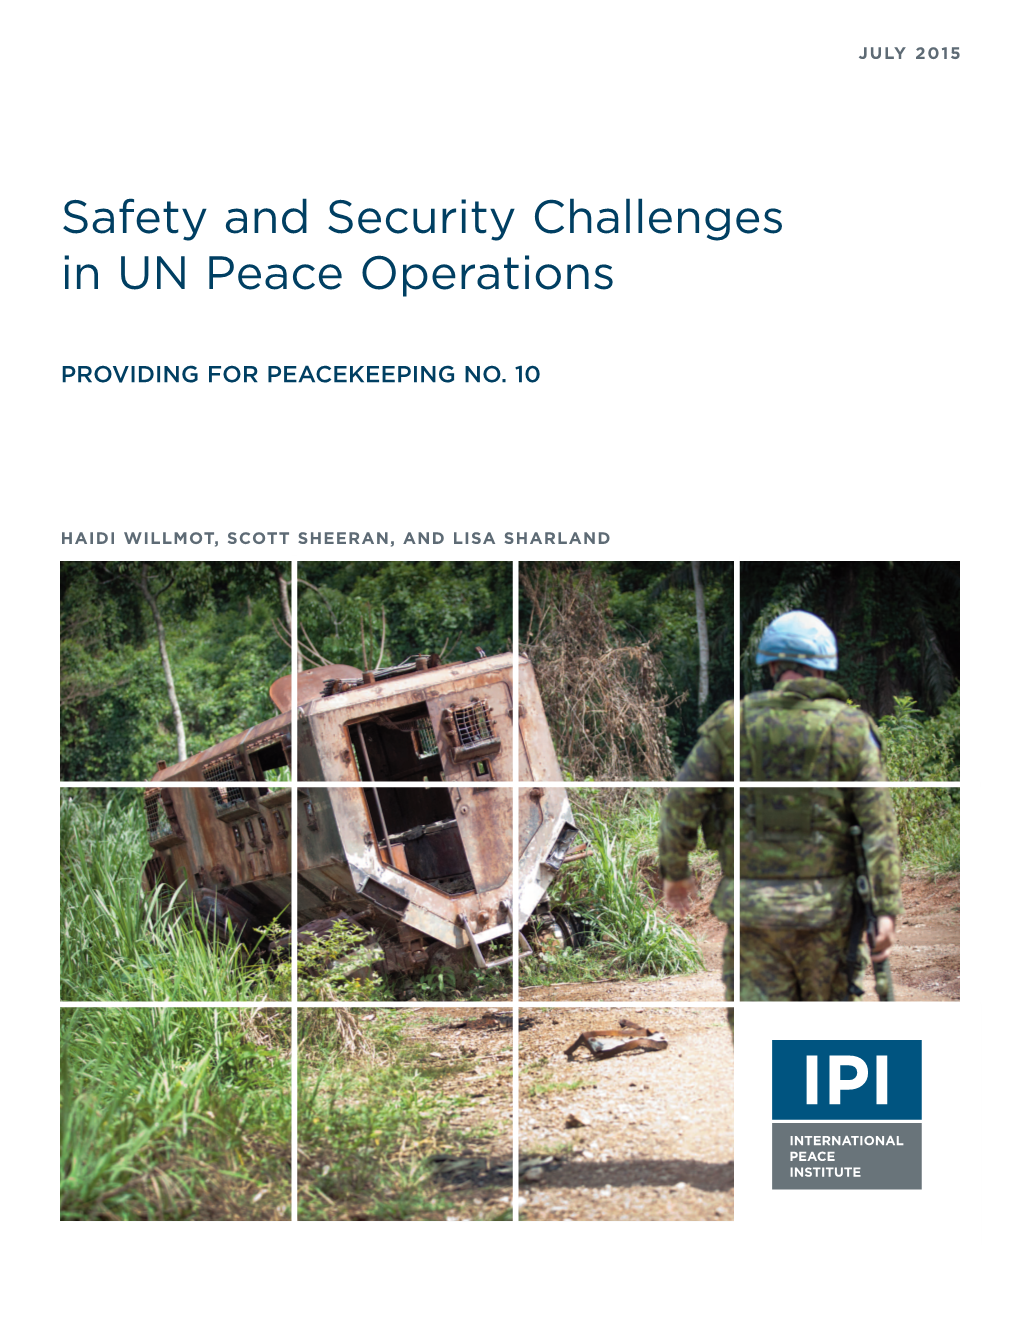 Safety and Security Challenges in UN Peace Operations